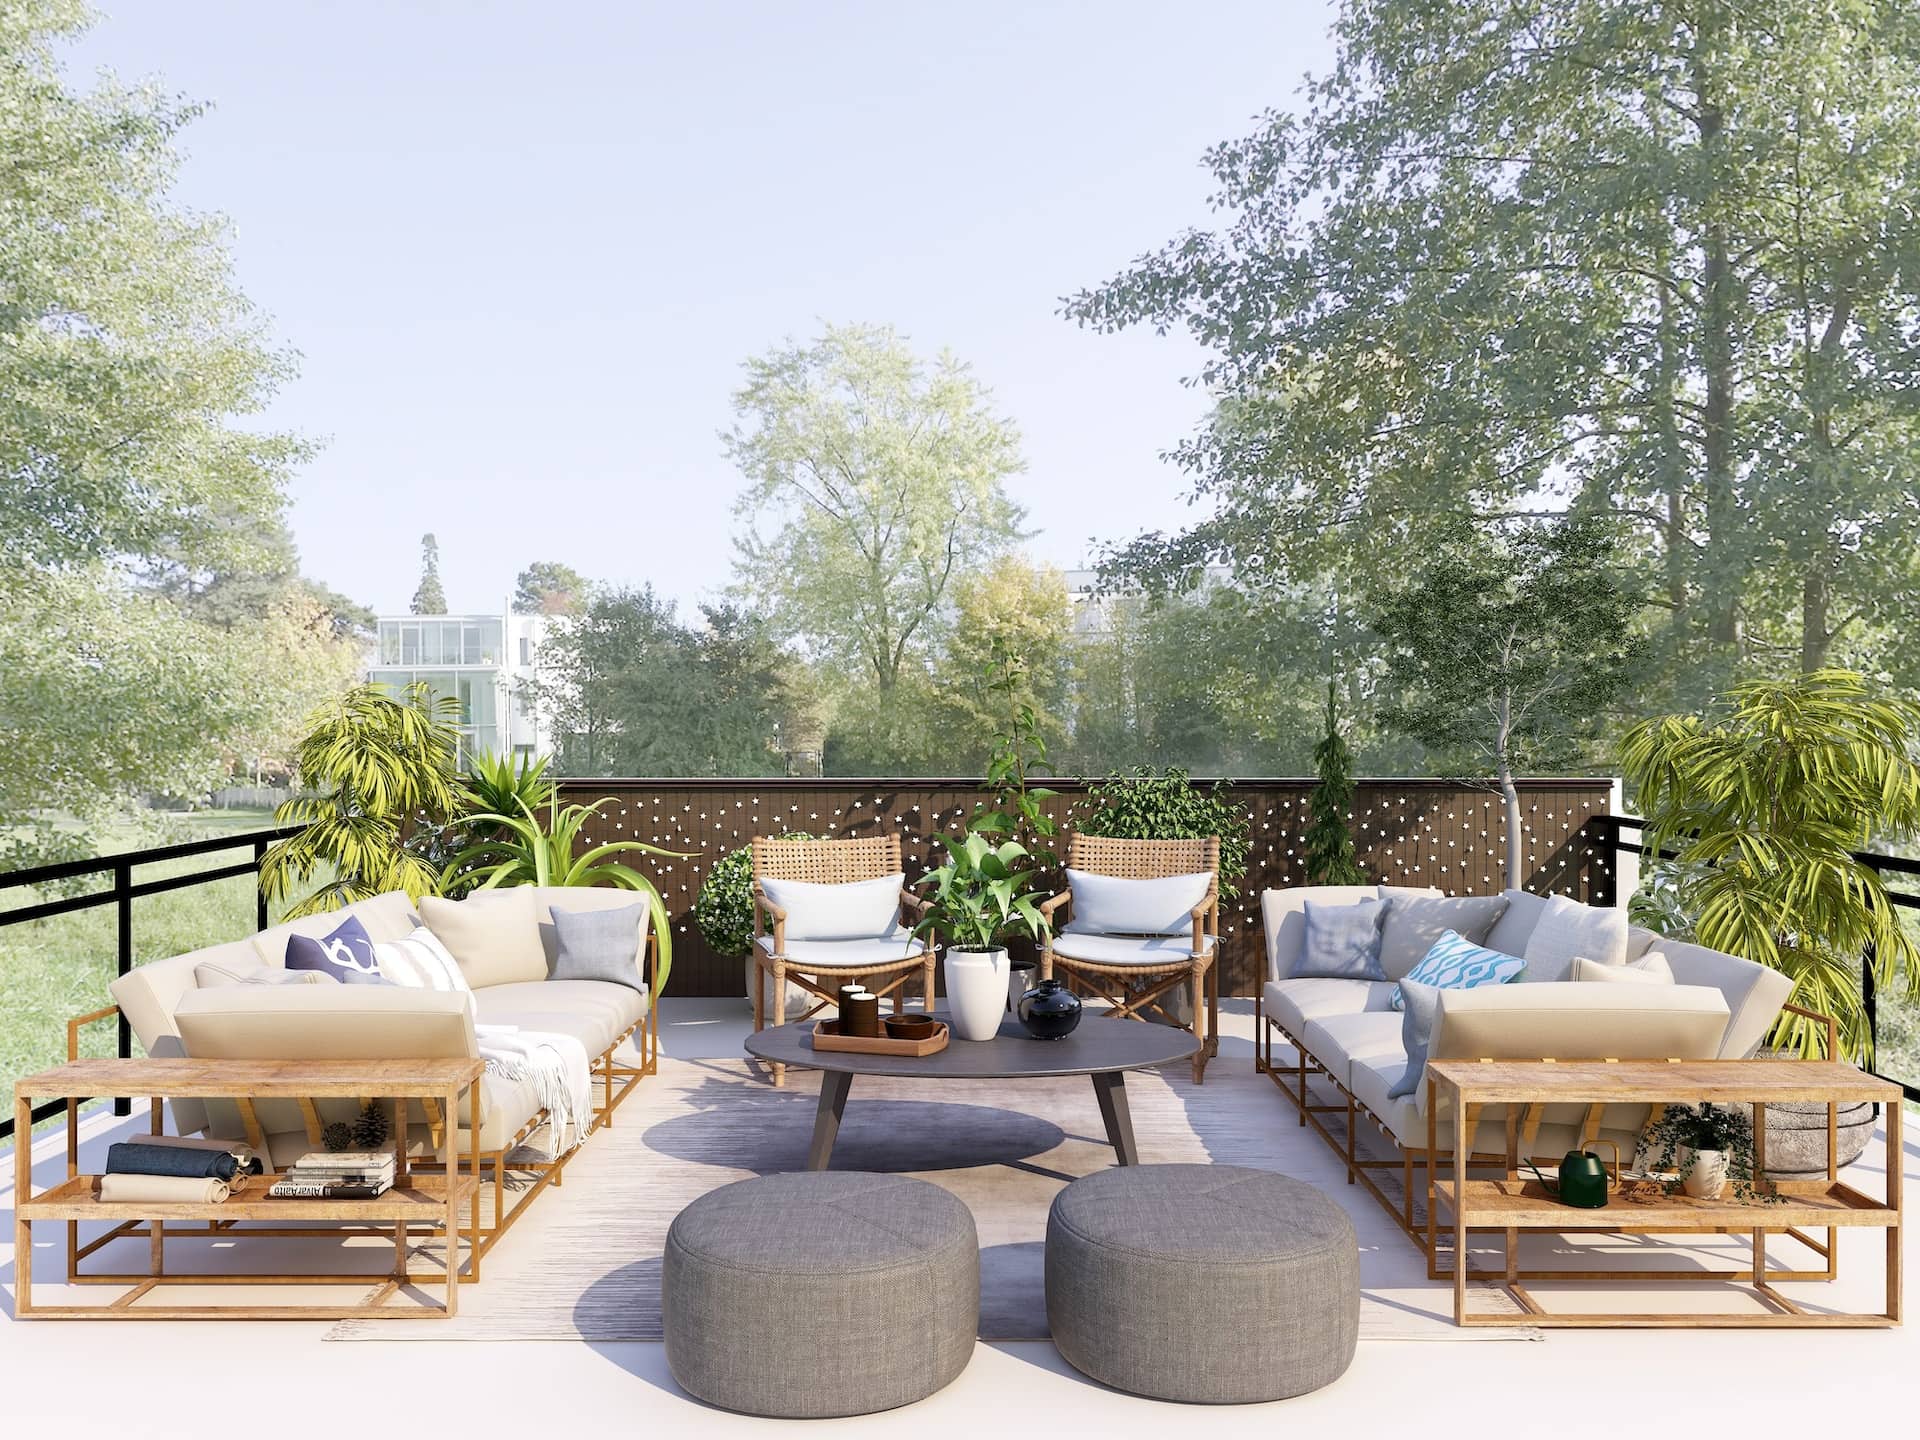 Decorating Your Patio with the Right Sofa